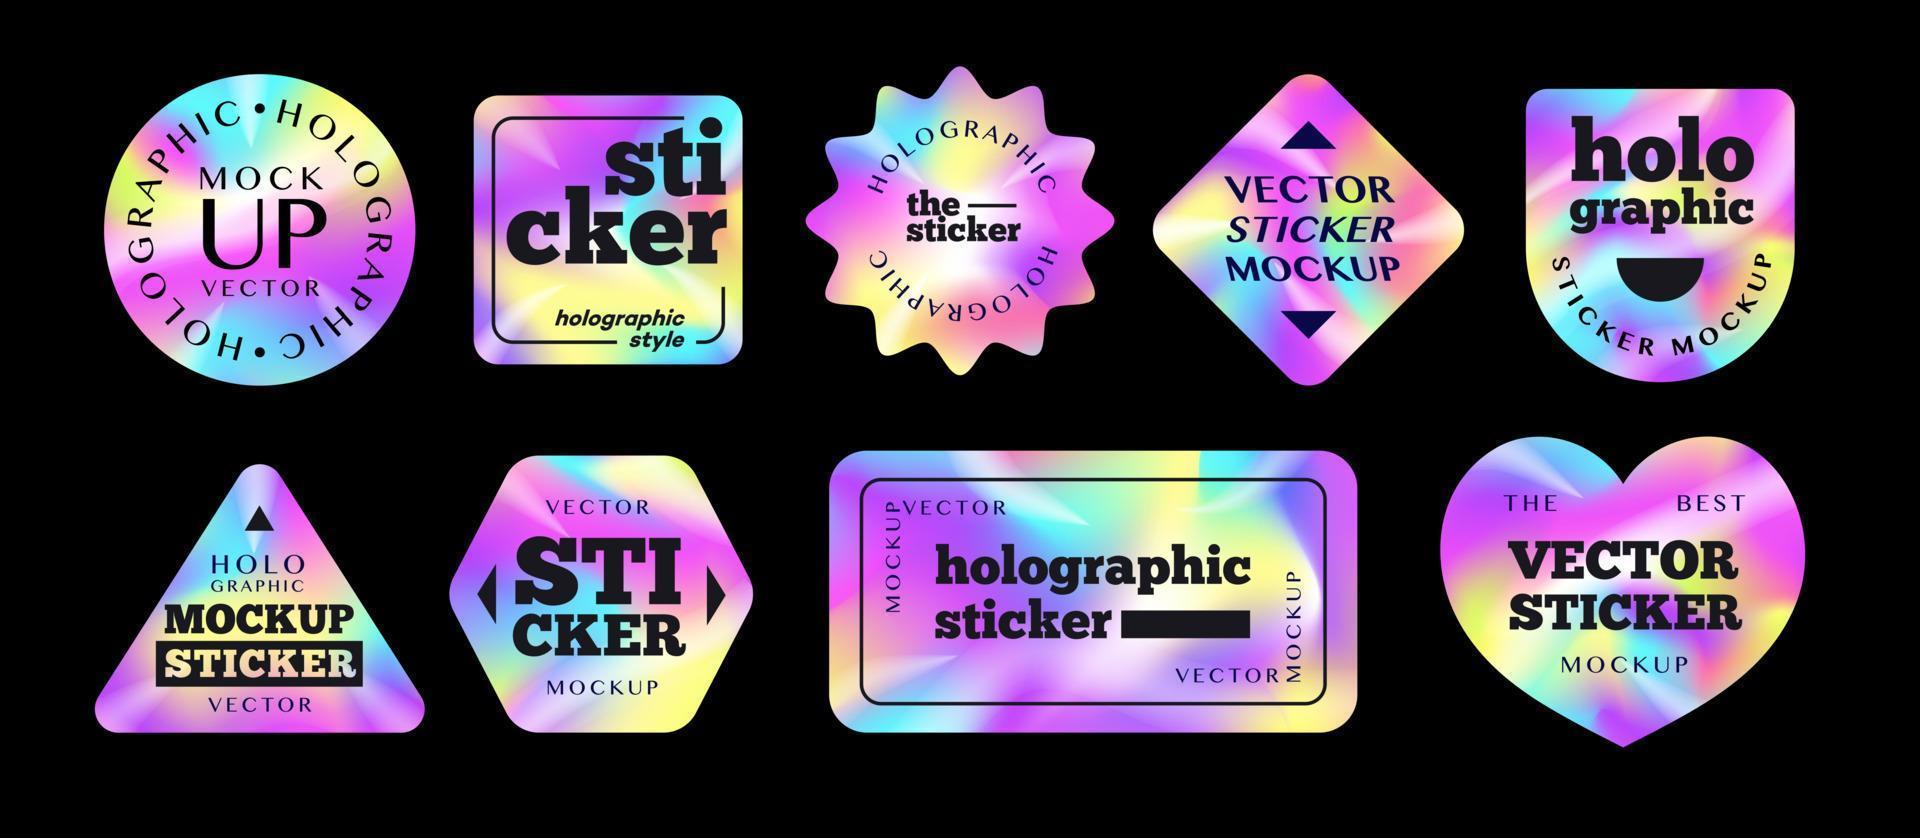 How To Print Holographic Stickers 4OVER4 COM